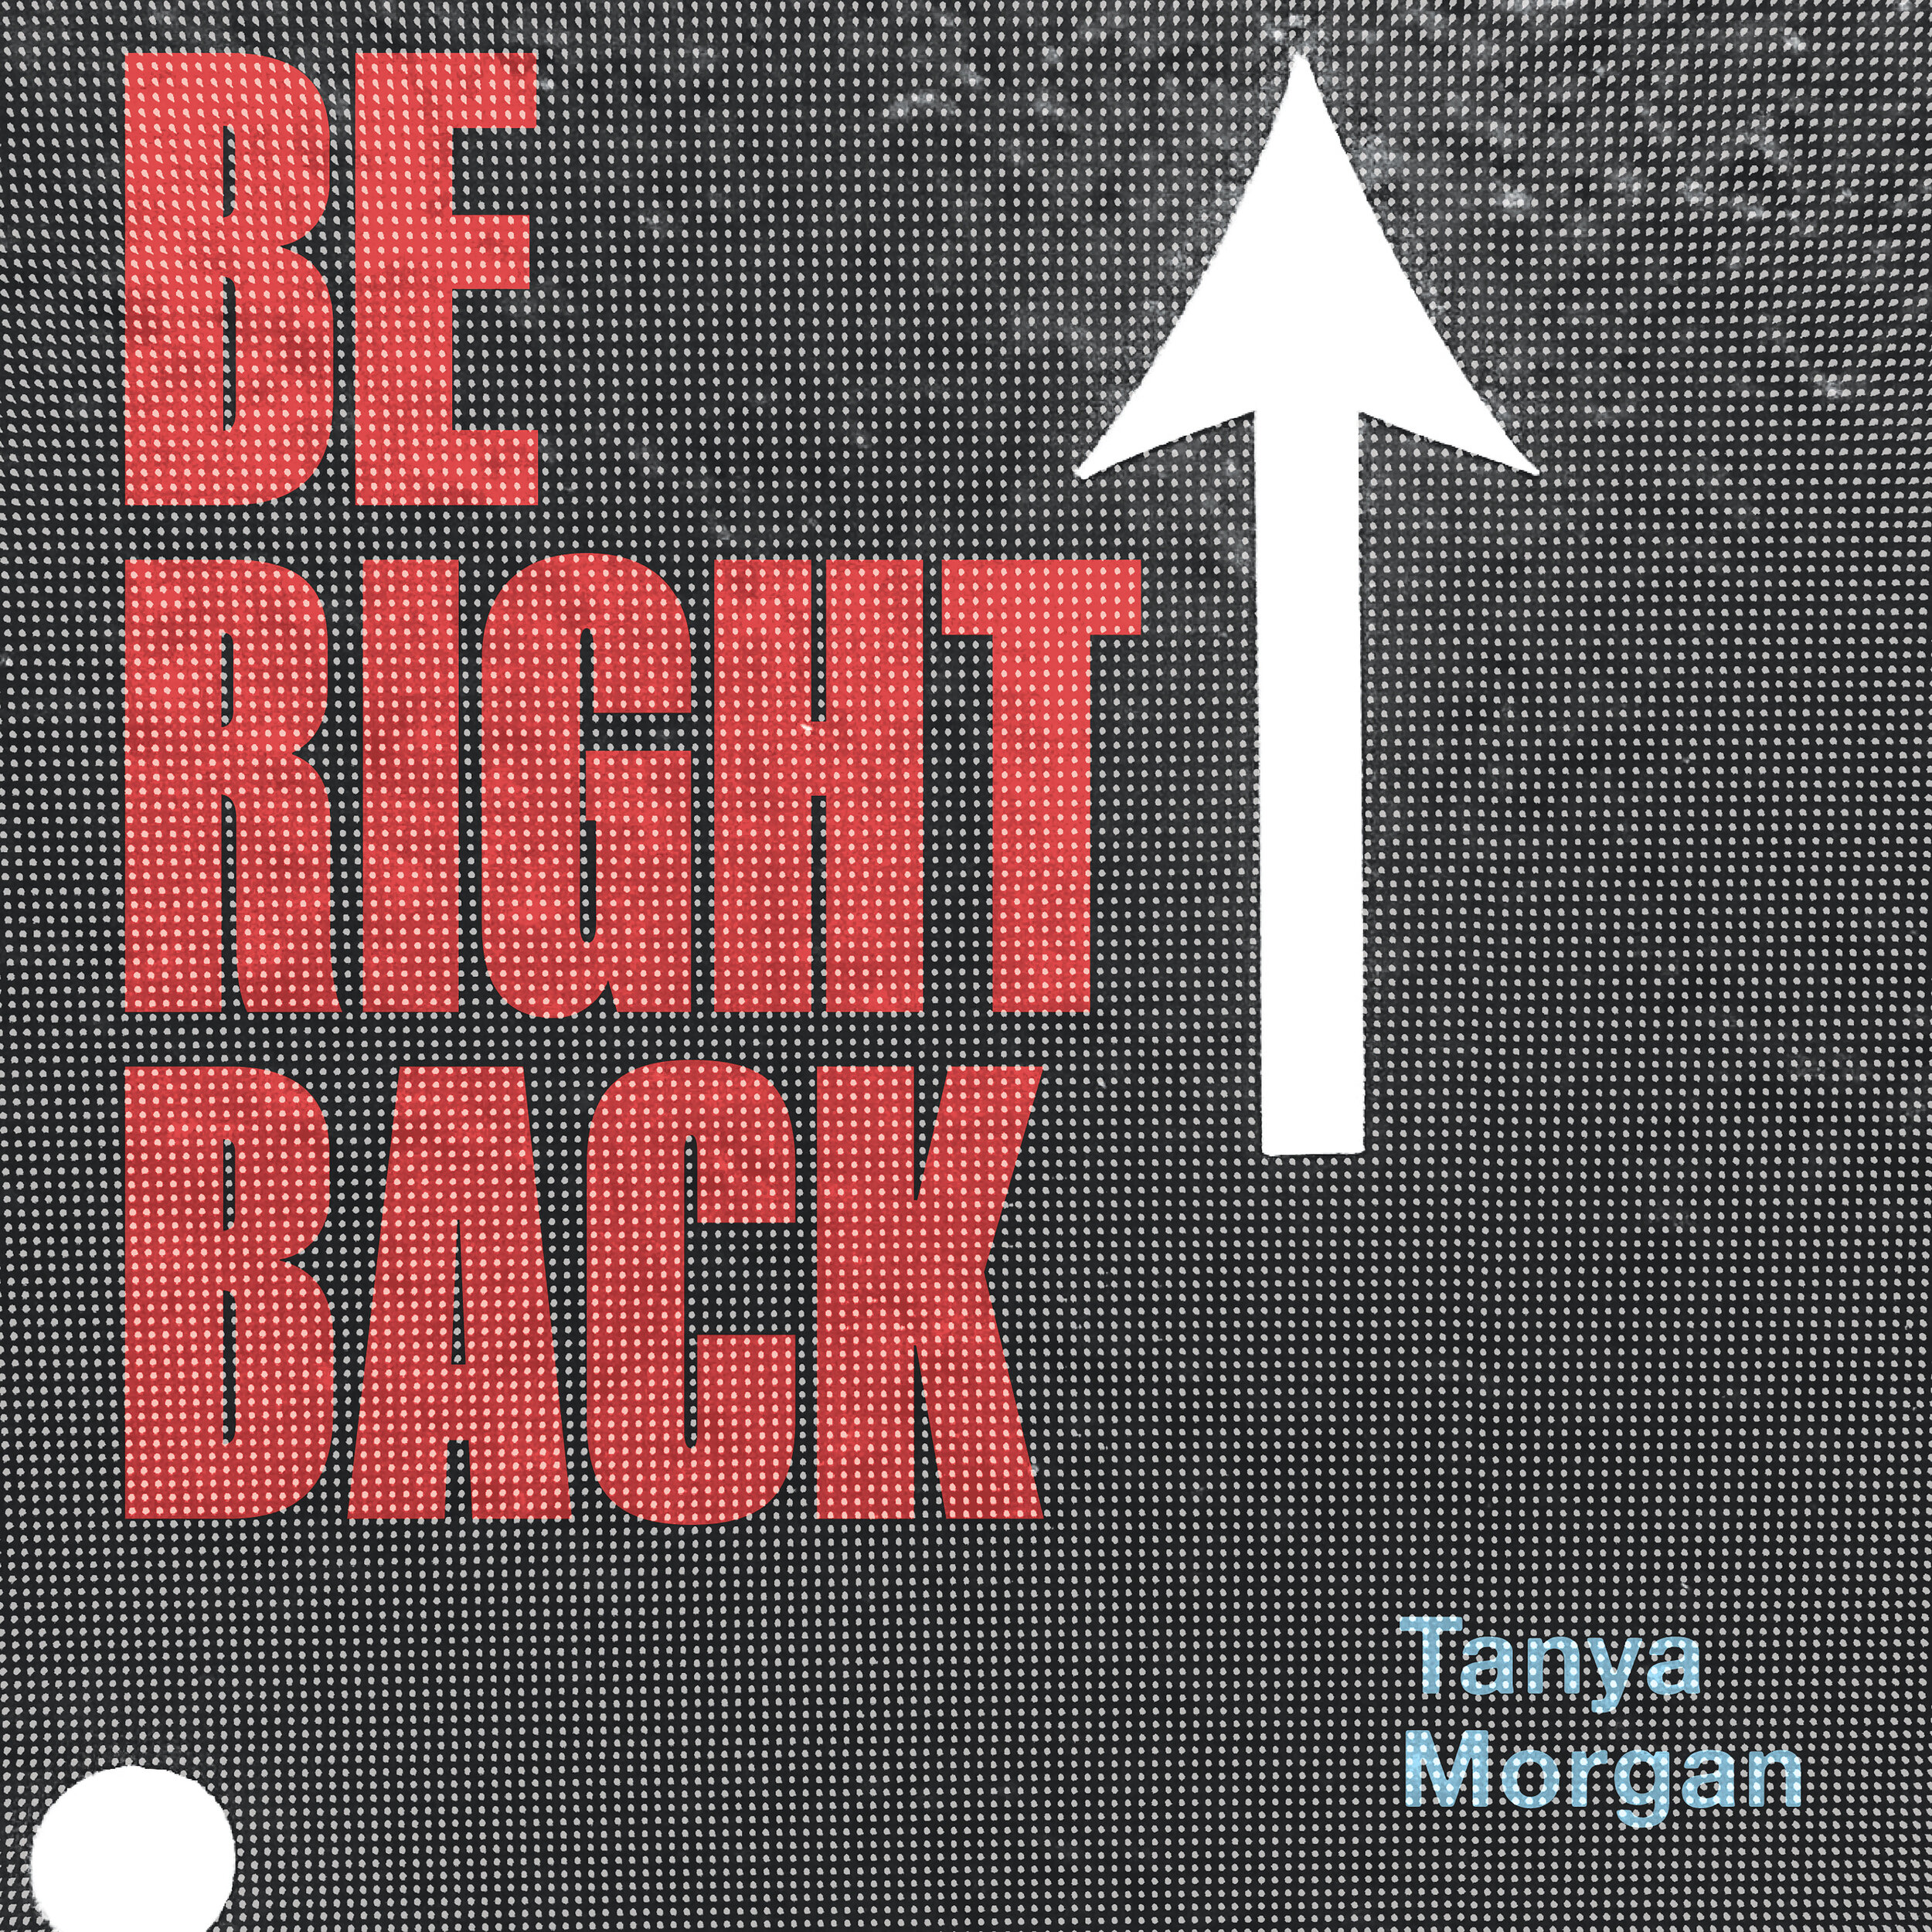 BE RIGHT BACK (2020)